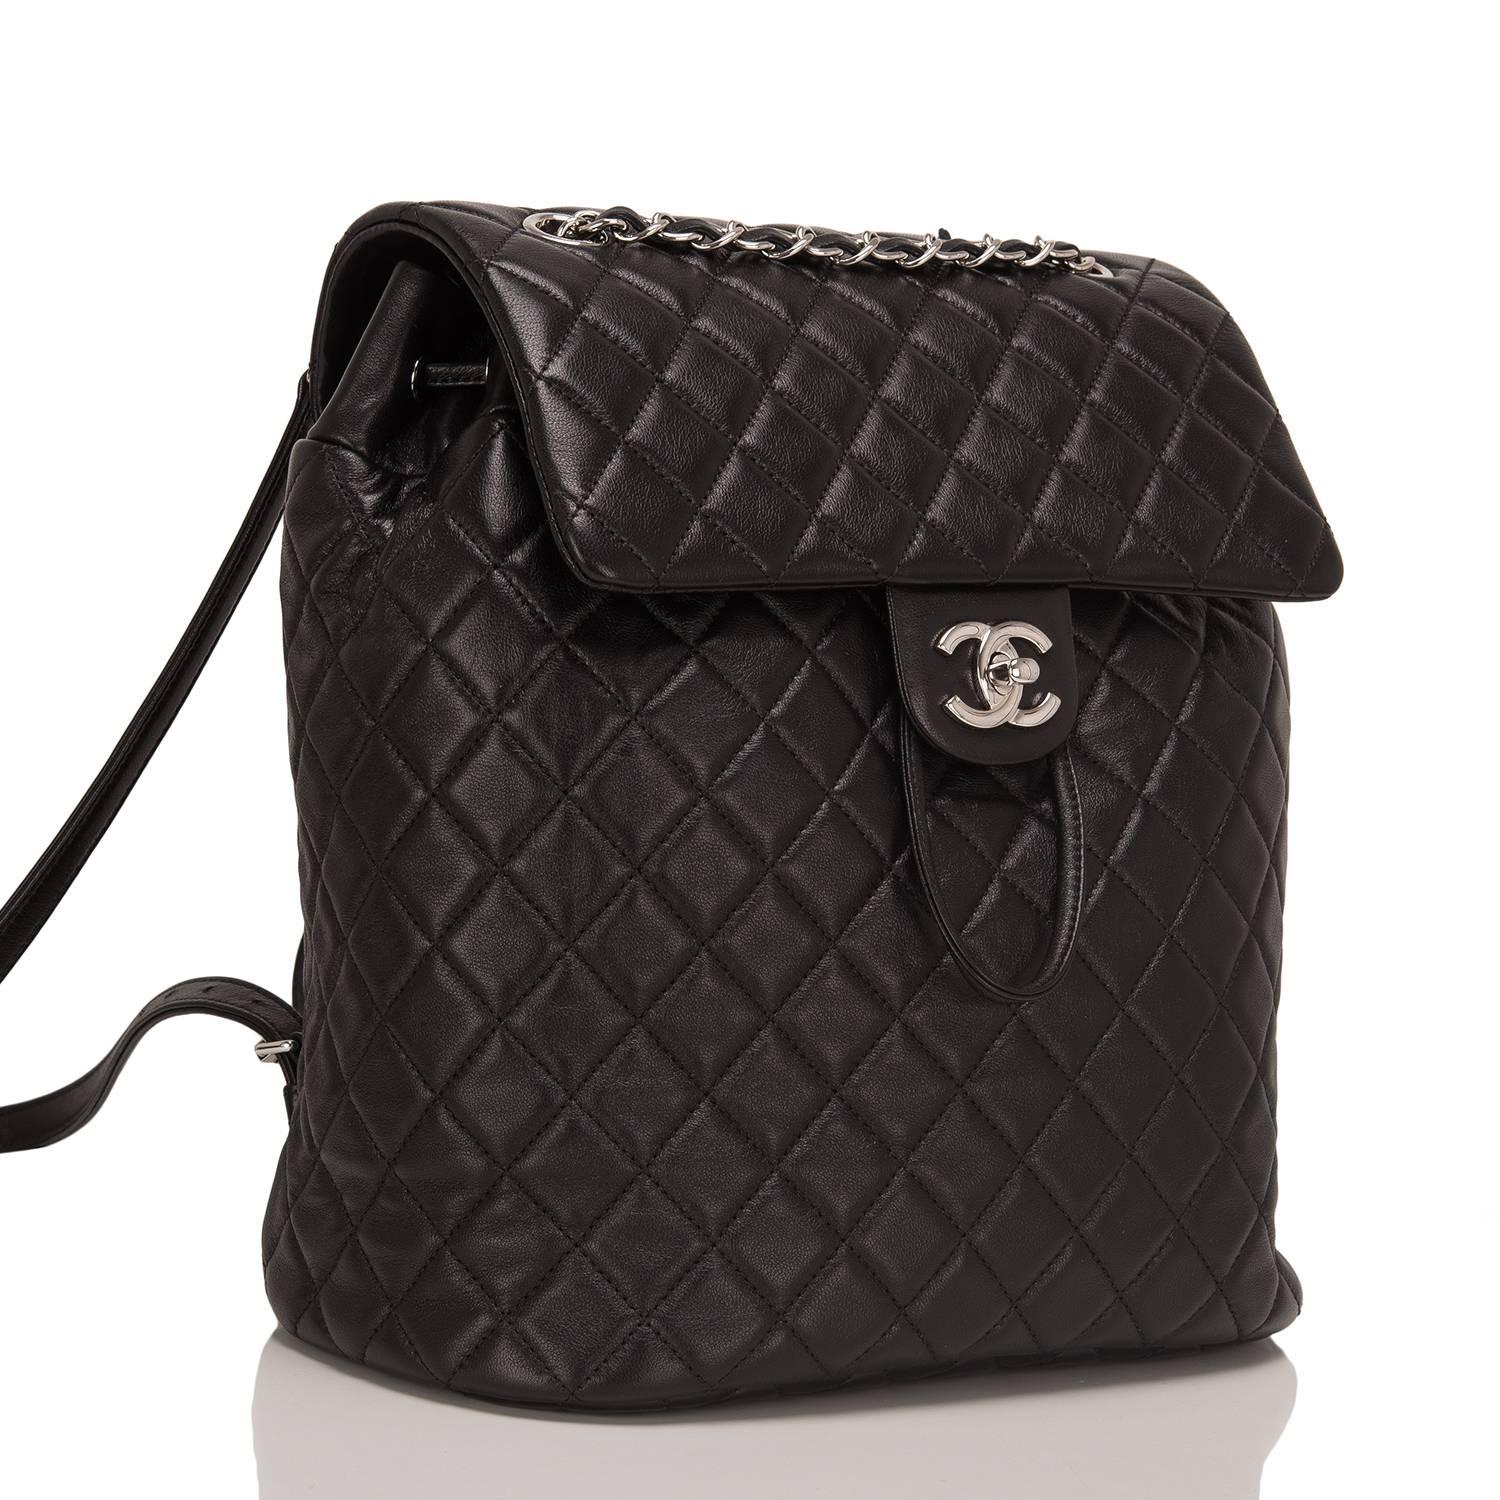 Chanel Urban Spirit large backpack of black quilted lambskin leather with silver tone hardware.

This bag features a front flap with a signature CC turnlock closure, an open back pocket, and adjustable interwoven silver tone chain link with black